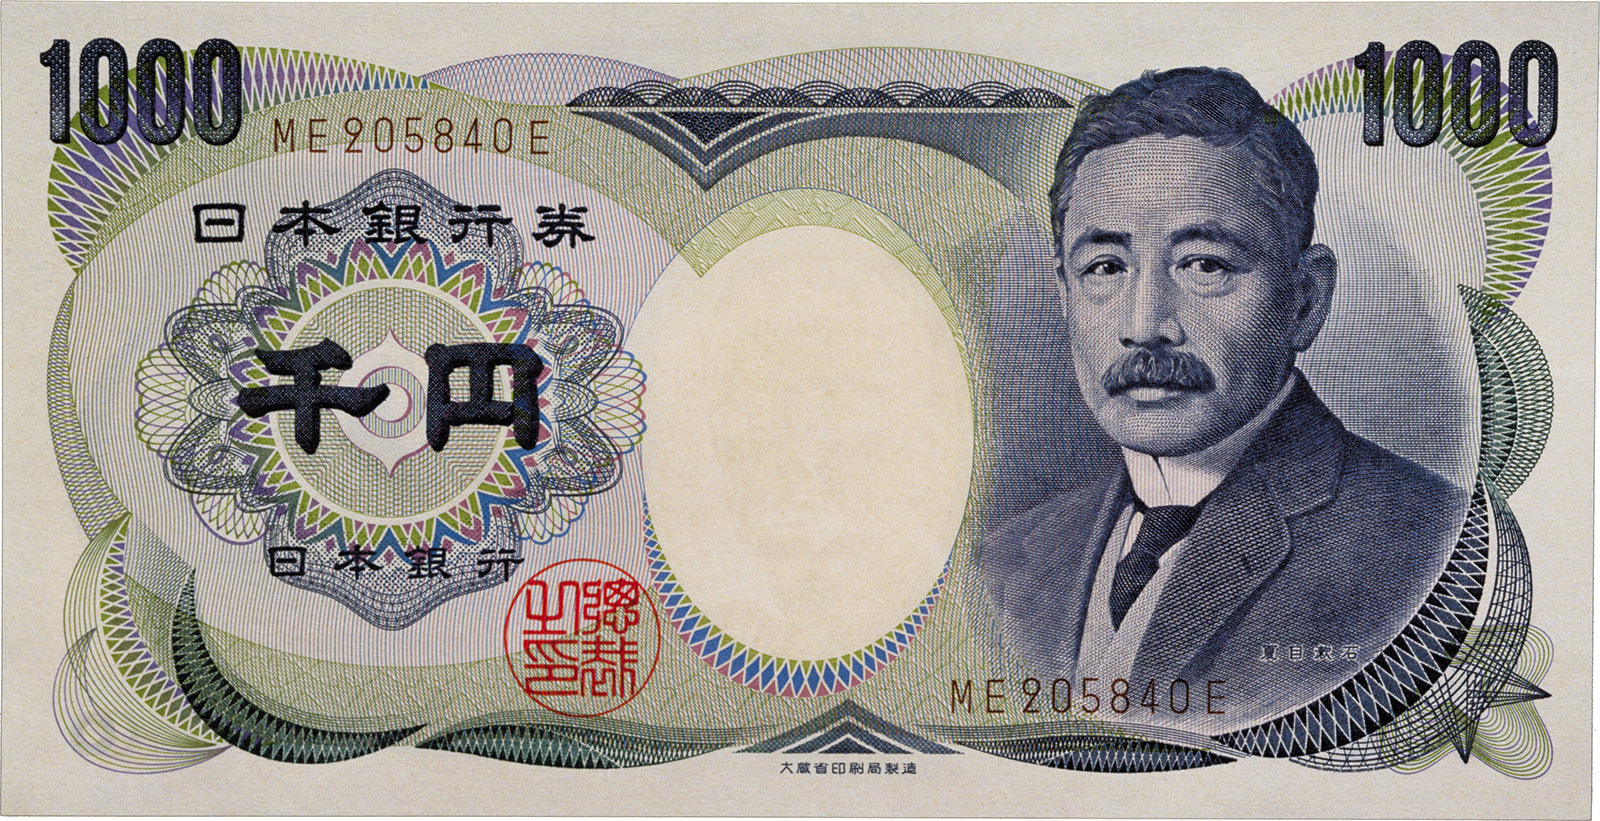 A Japanese banknote with a portrait of Natsume Sōseki